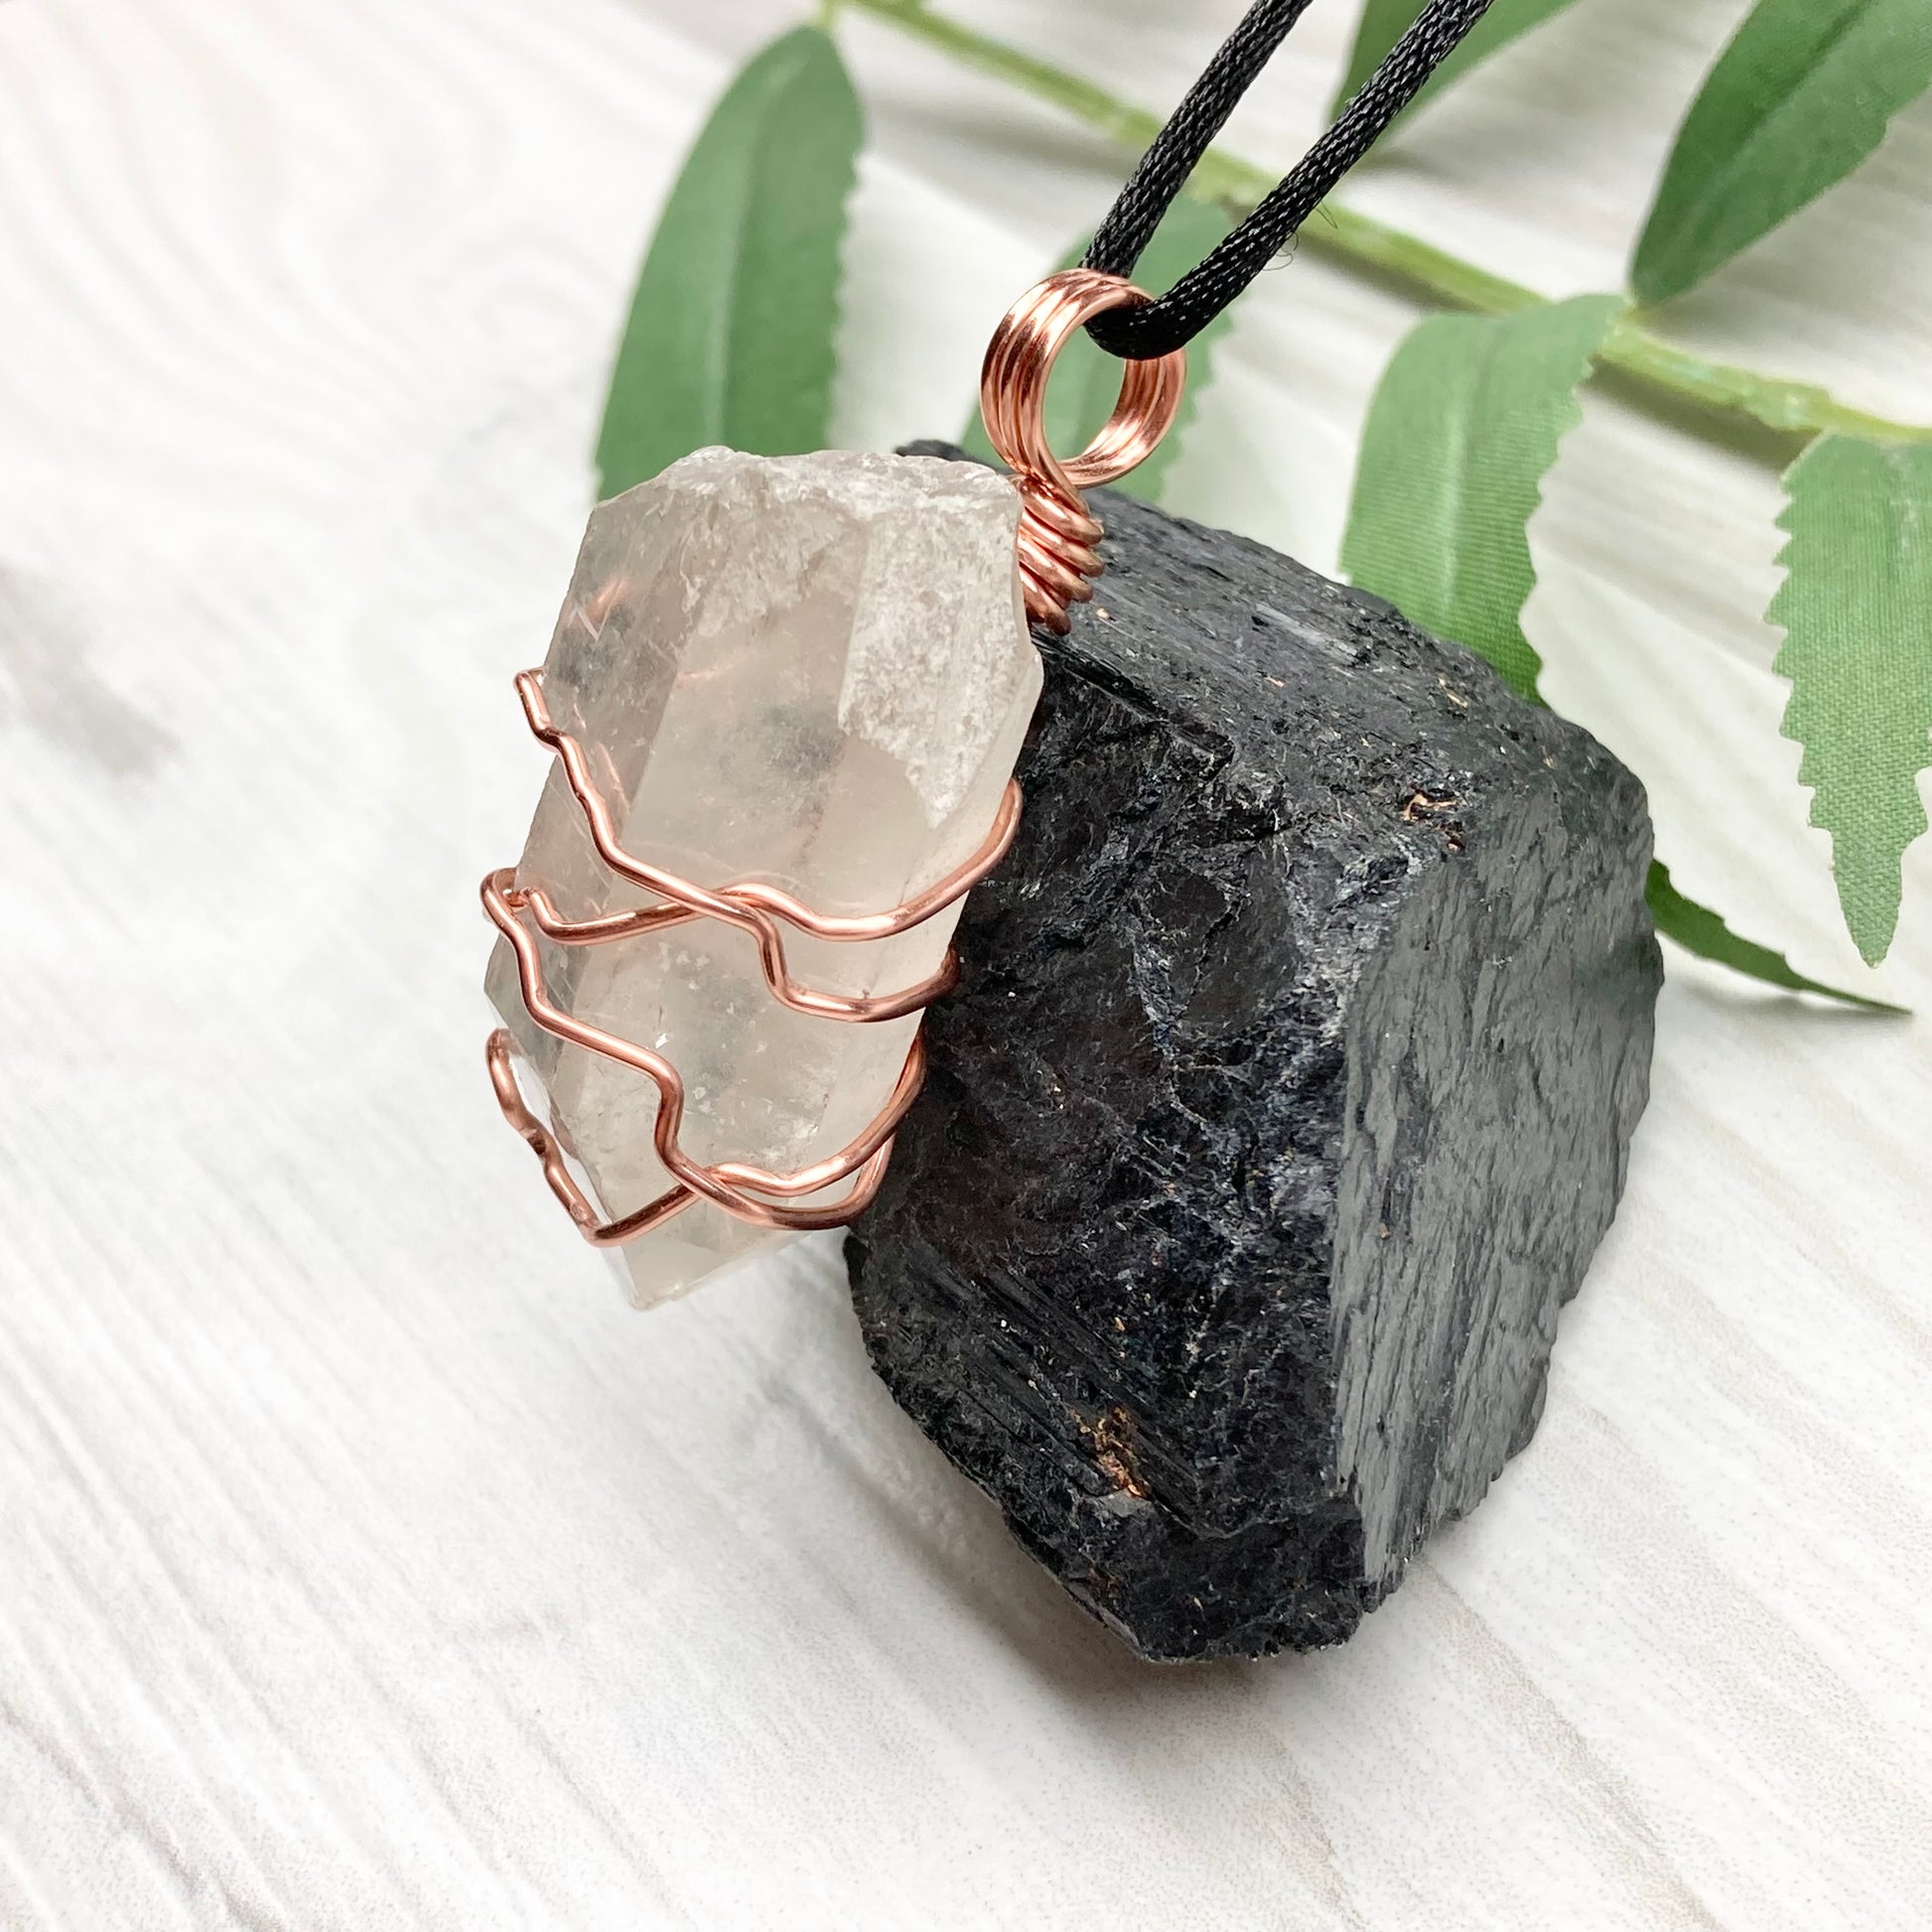 Raw Clear Quartz Crystal Necklace. Copper Wire Wrapped Stone Pendant. Comes On A Black Necklace. Handcrafted New Age Jewelry.